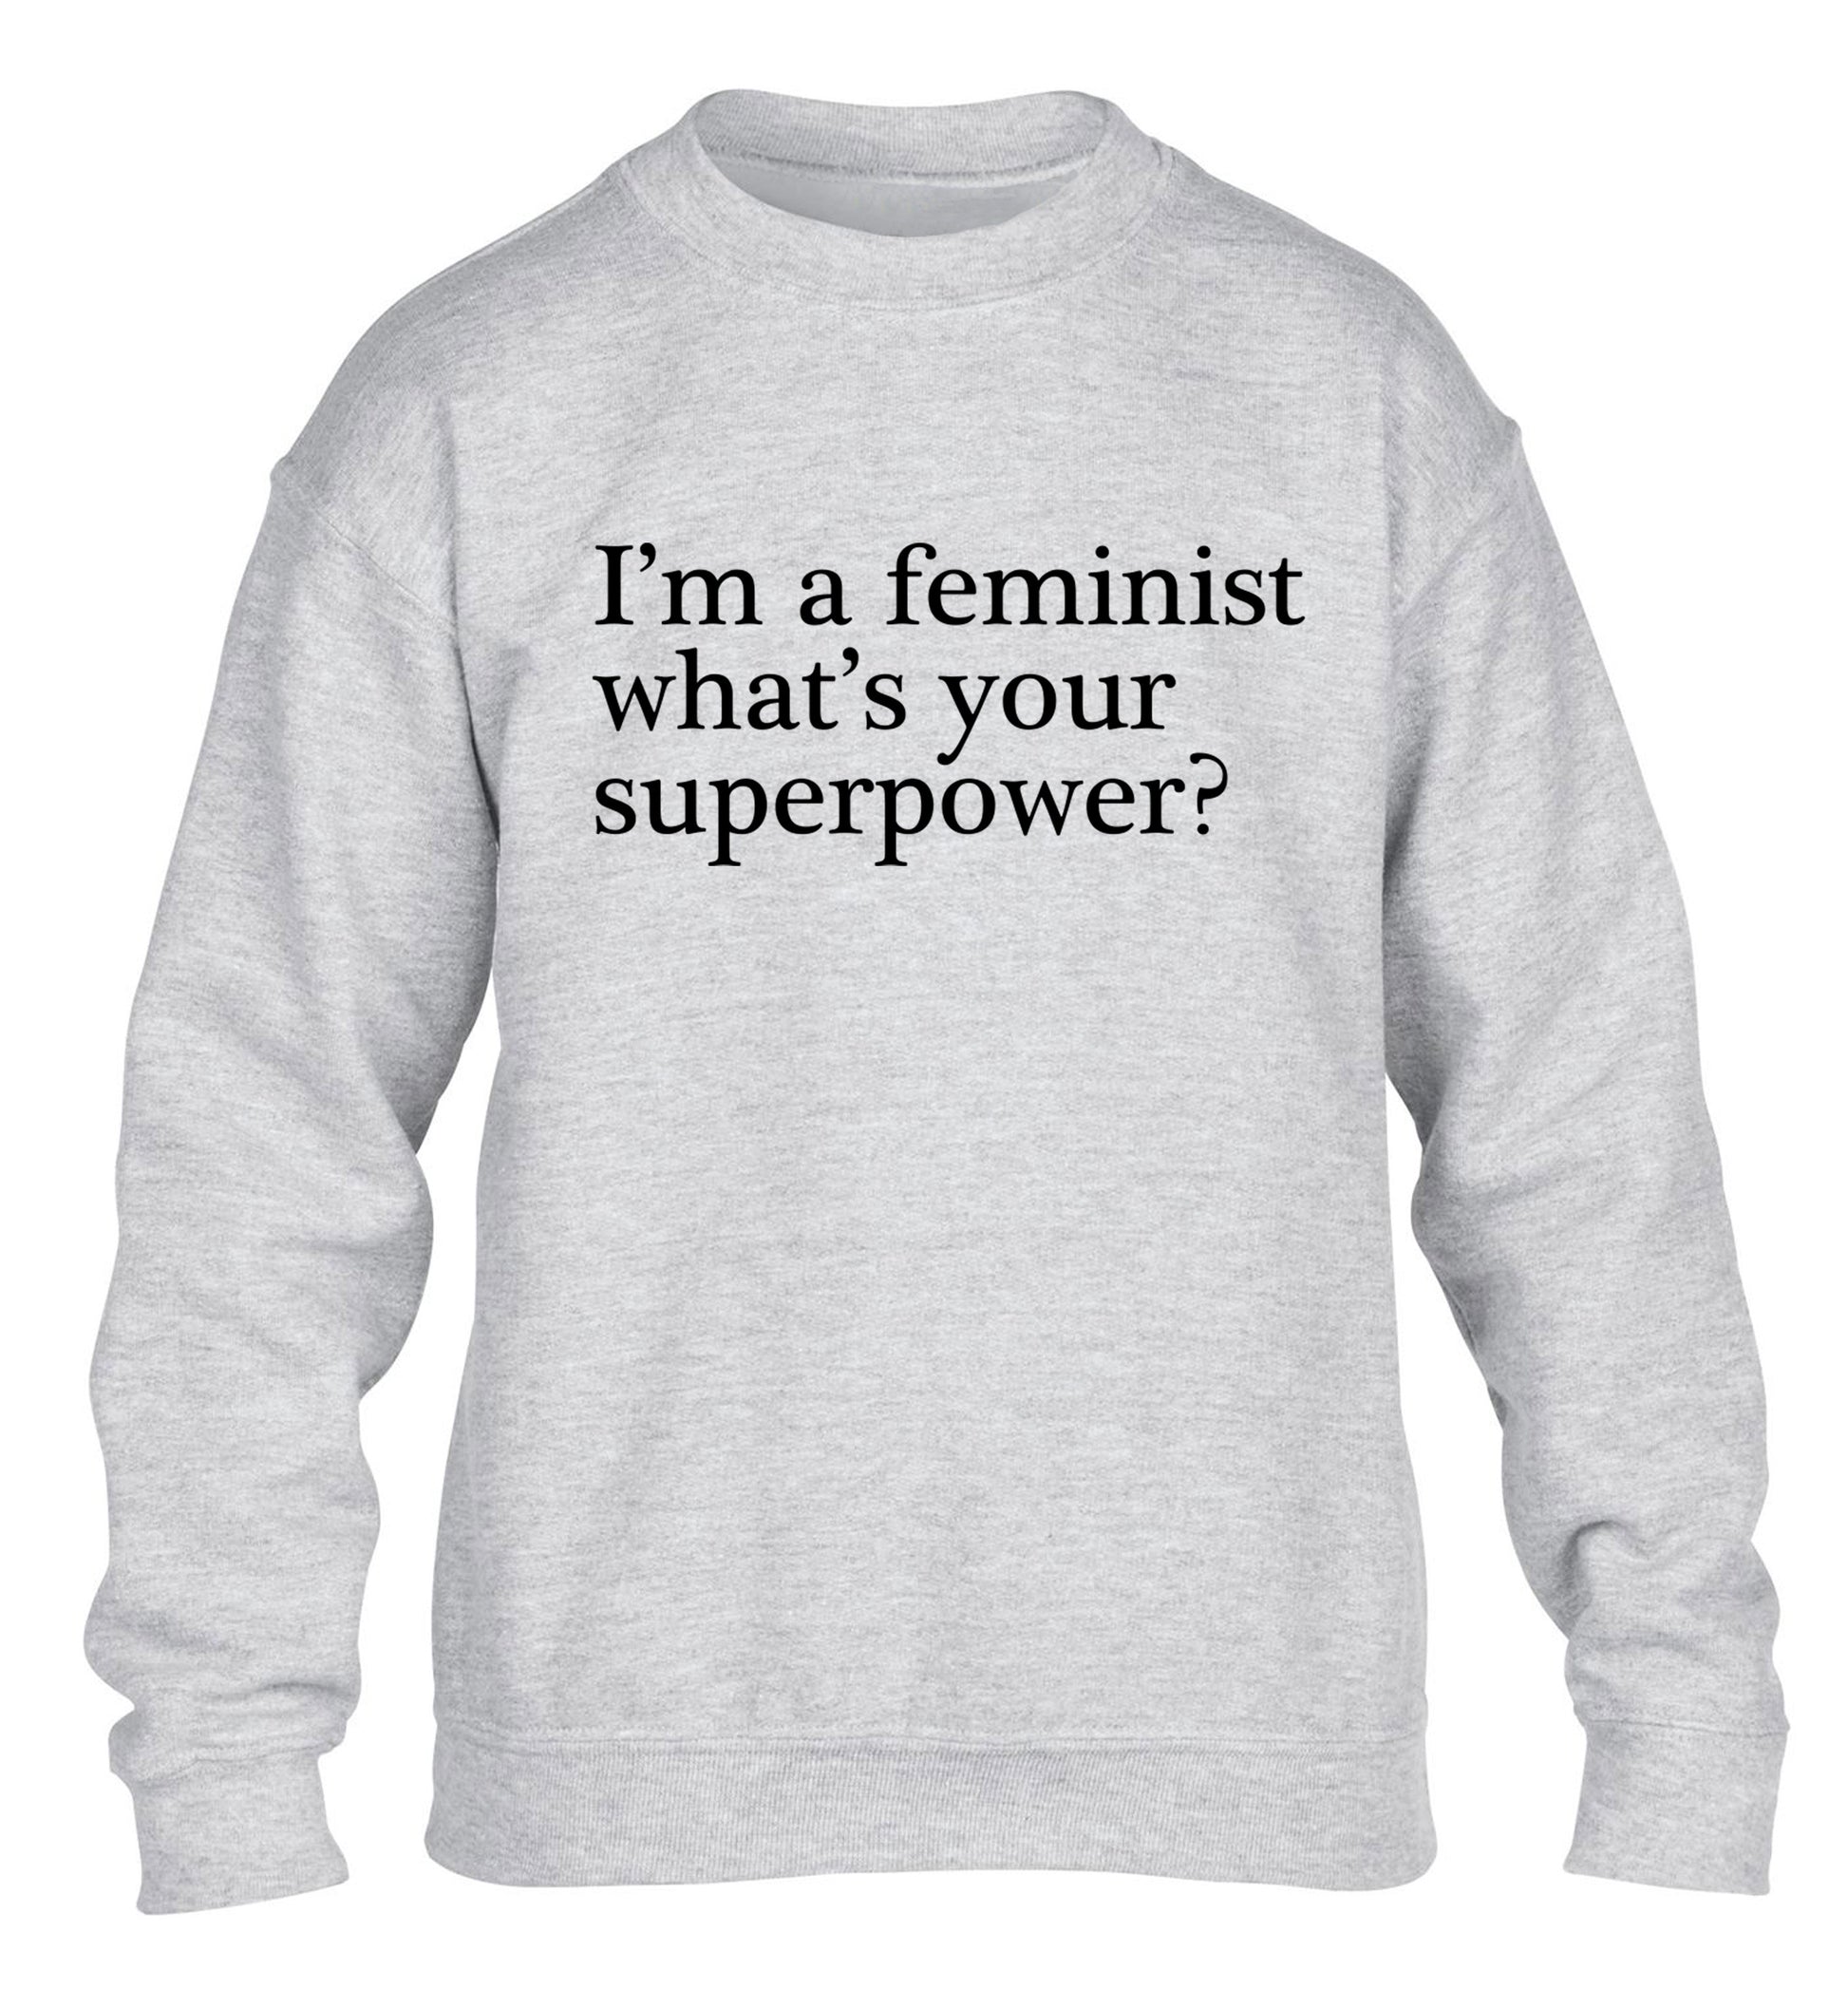 I'm a feminist what's your superpower? children's grey sweater 12-14 Years